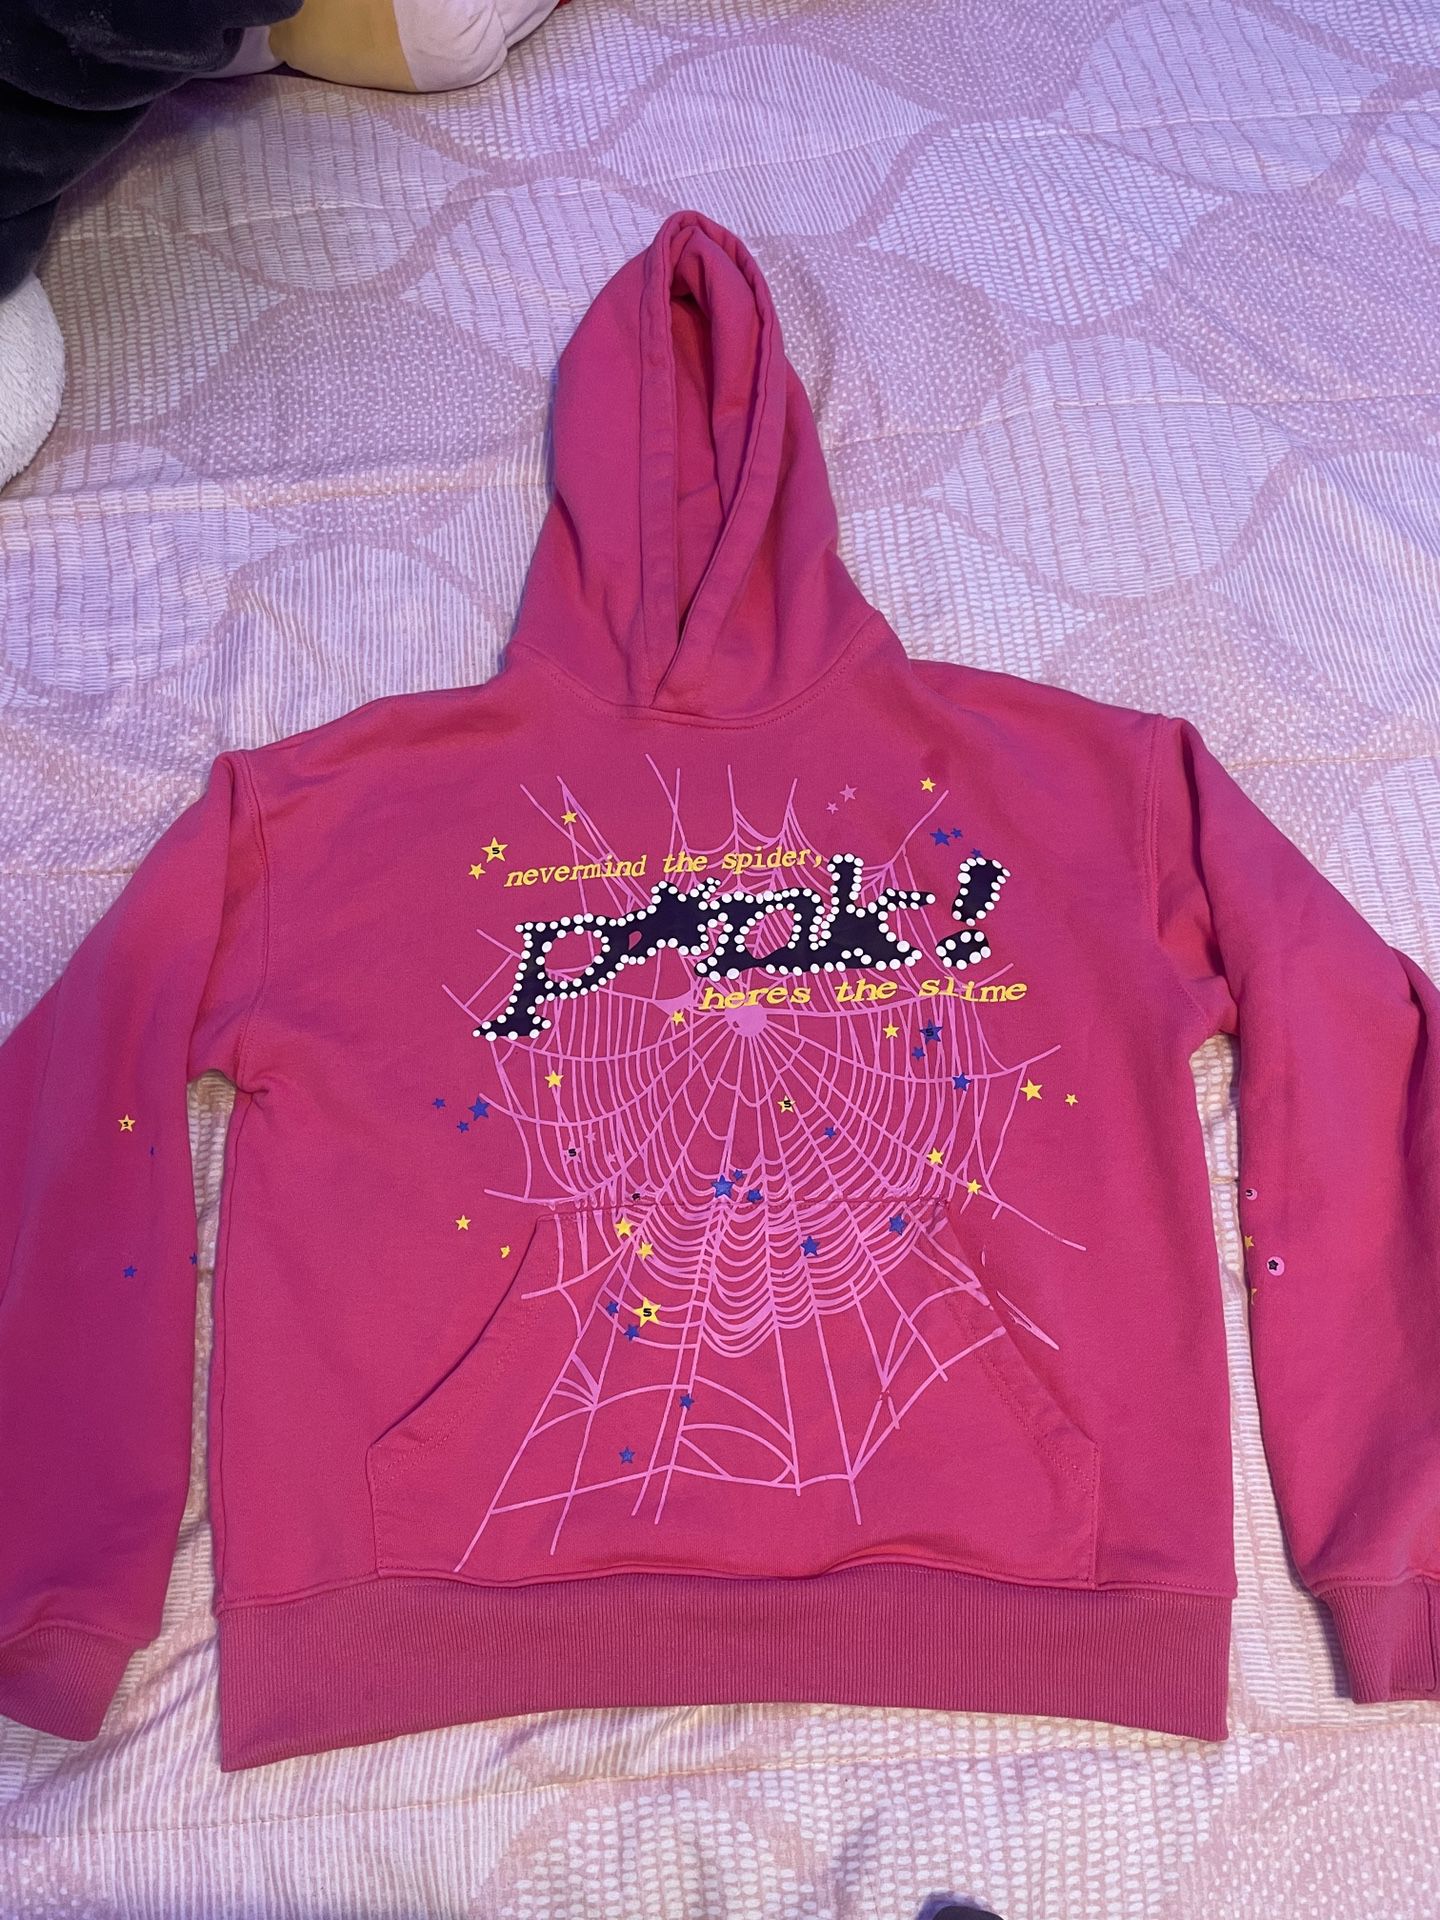 small pink sp5der hoodie wore 5 times.